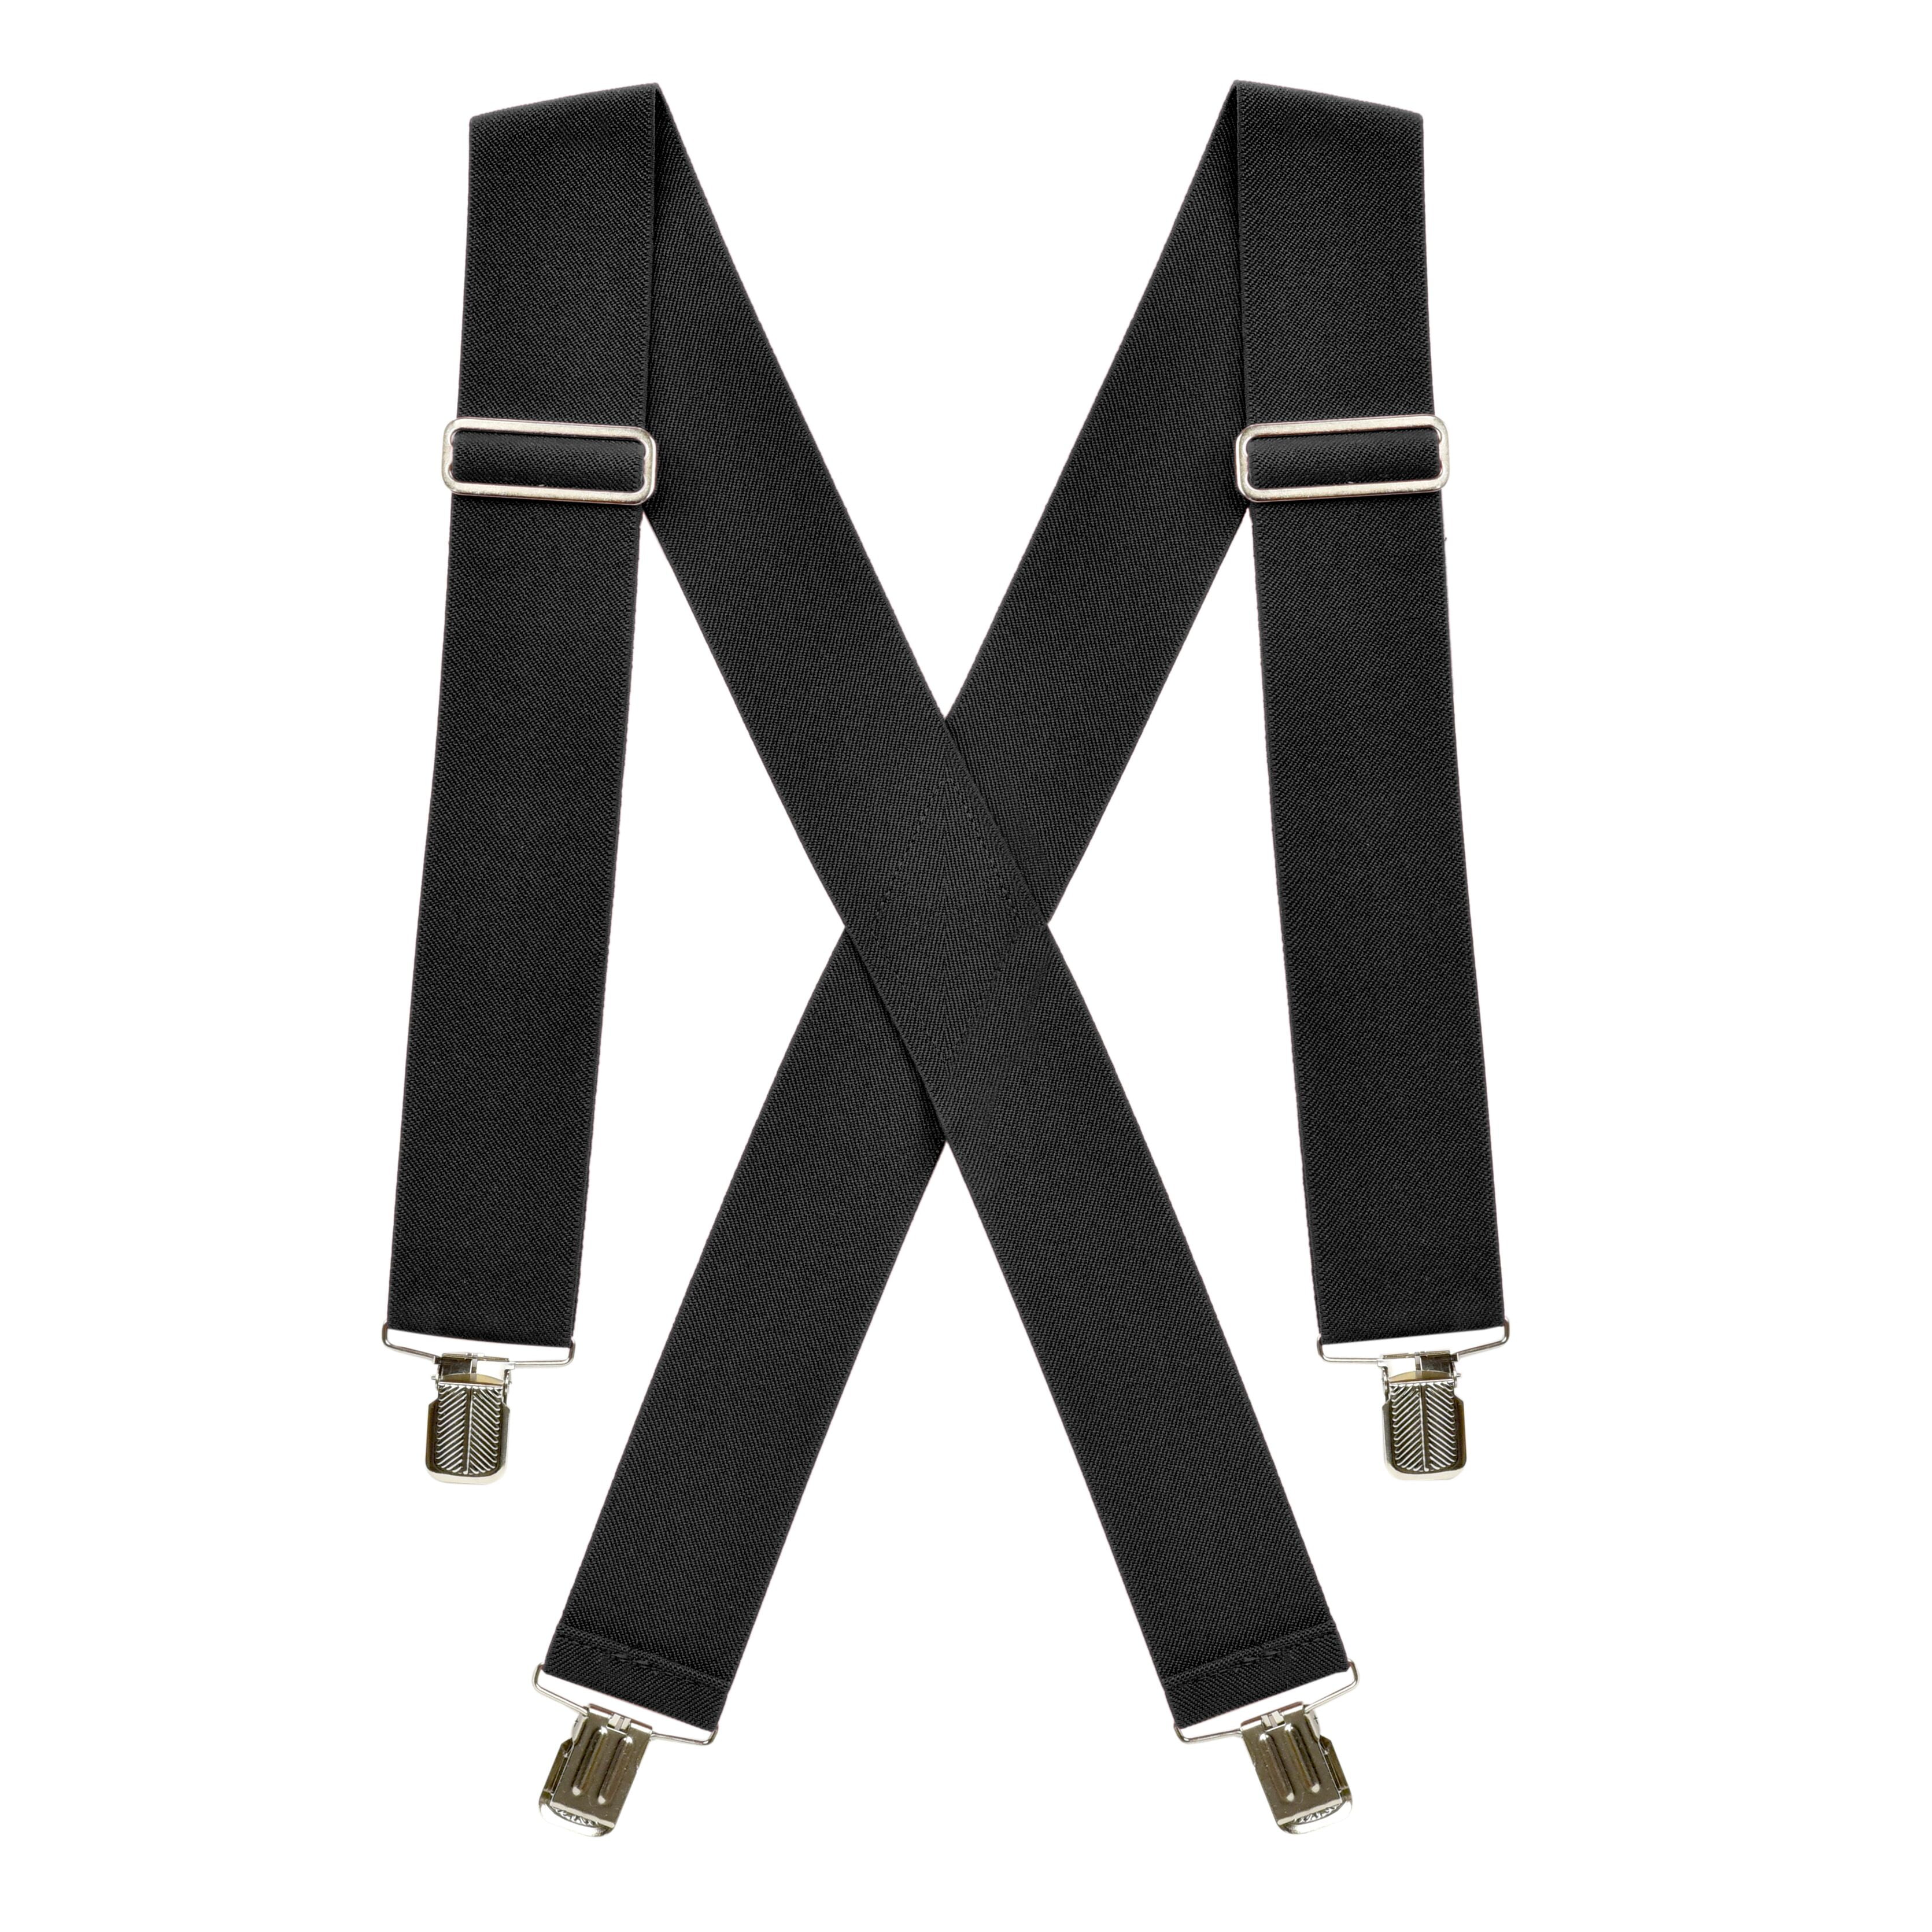 HOT FIRE FLAMES American Made Custom Suspenders 2" Wide with Metal Clips 